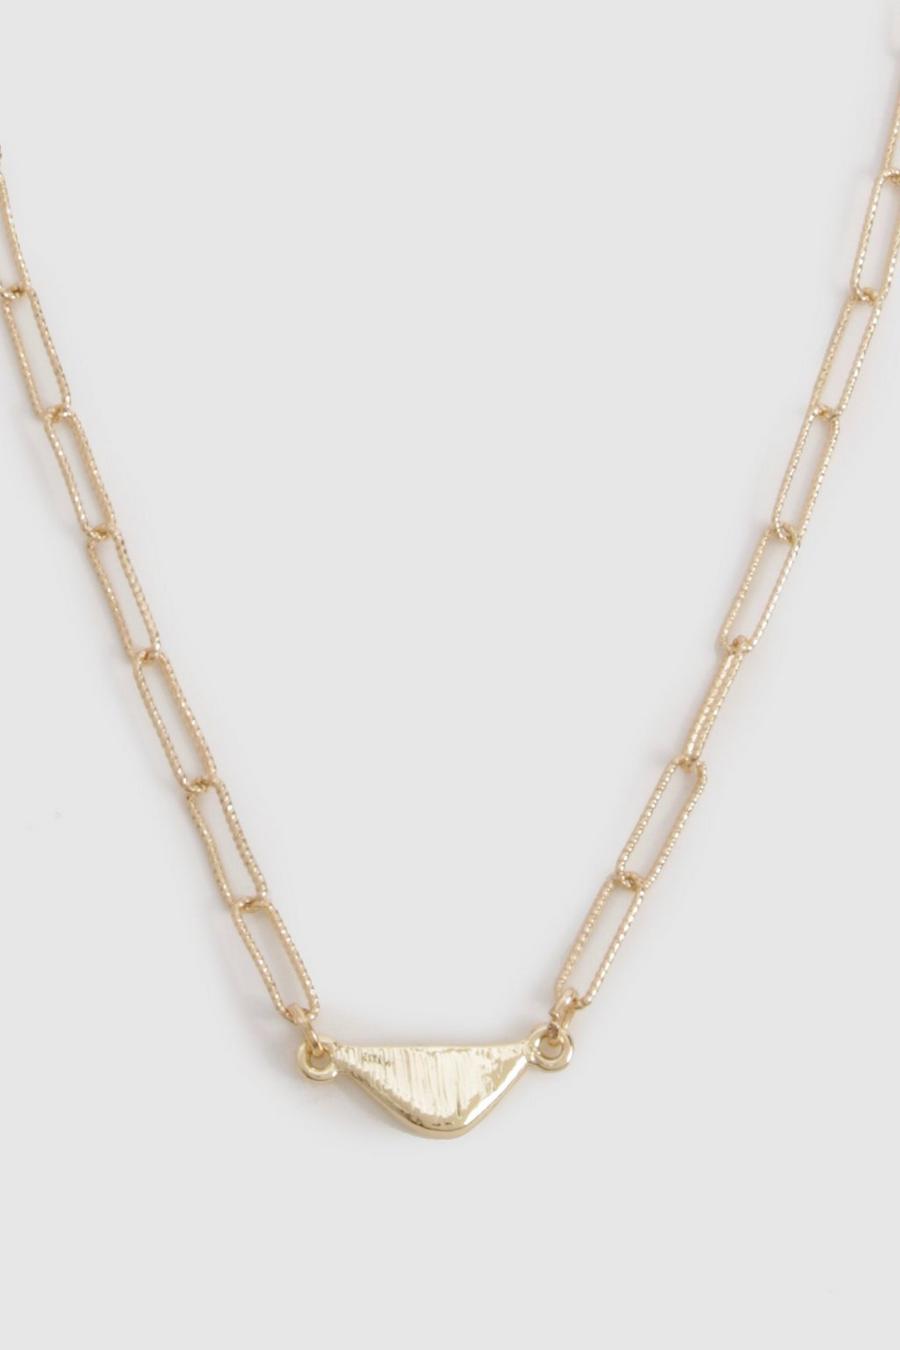 Gold Triangle Detail Chain Link Necklace 